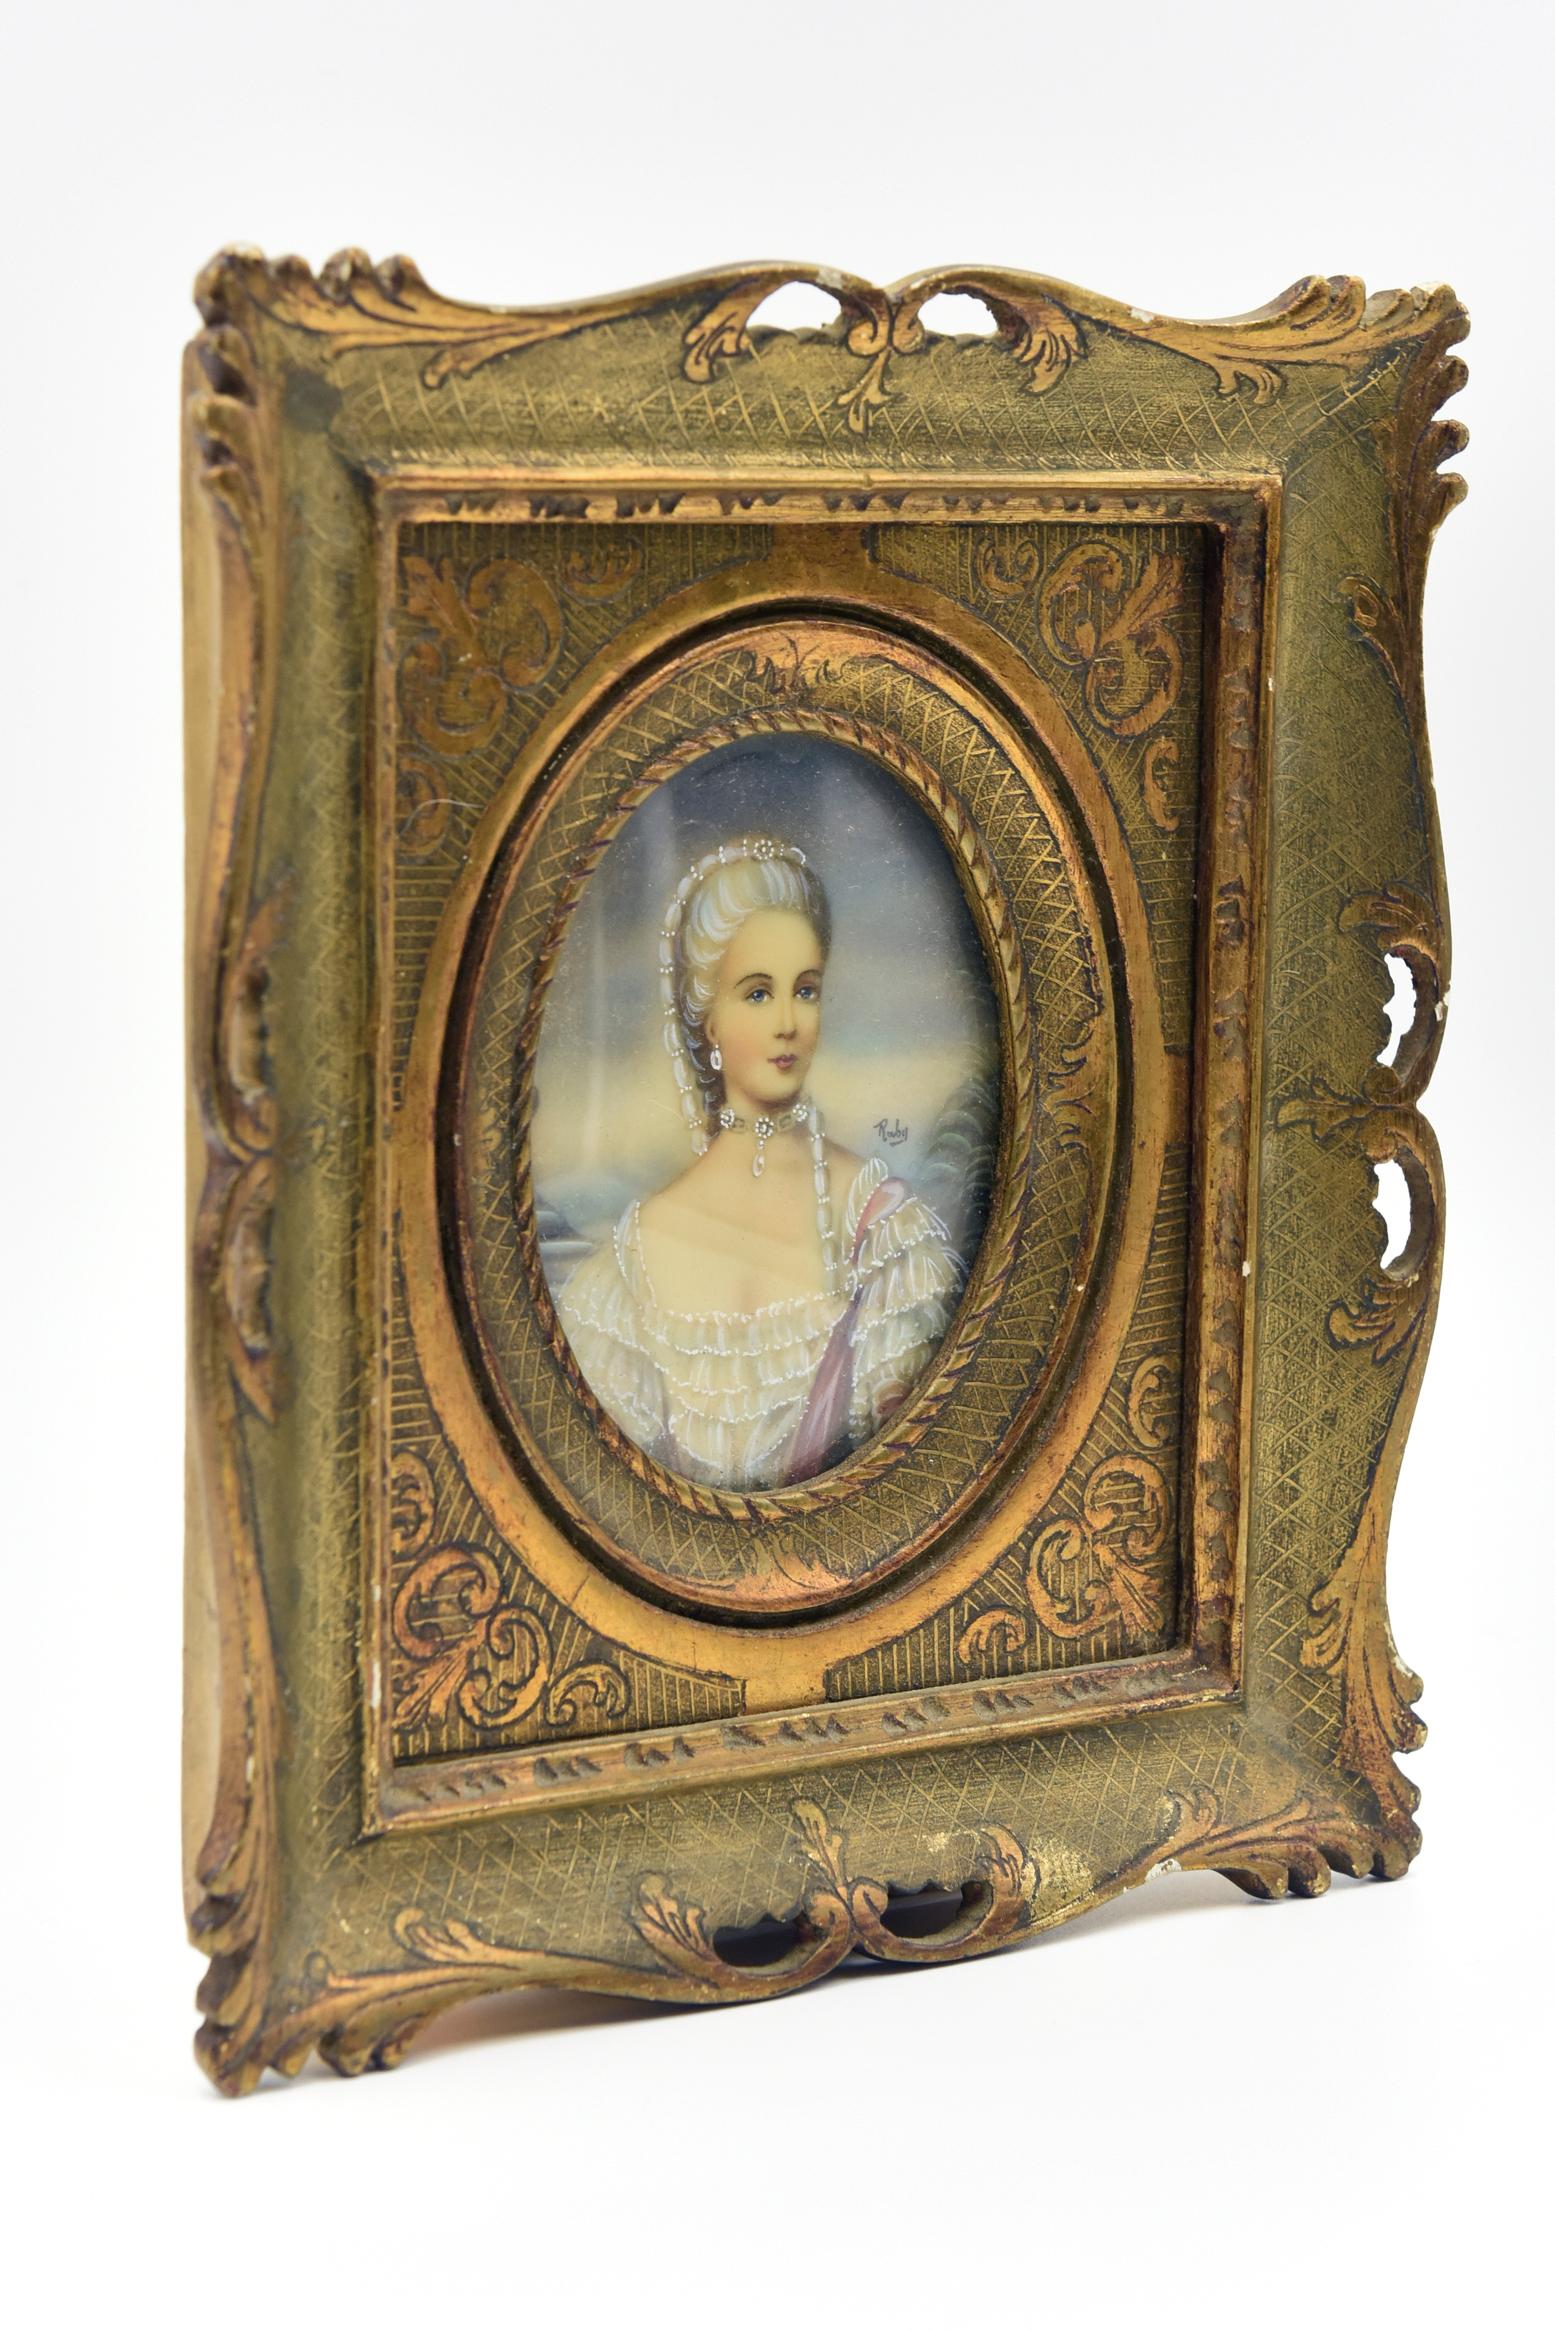 Beautiful hand painted jeweled lady oval portrait under glass. The giltwood frame is decorated with a scroll design. The painting is signed 